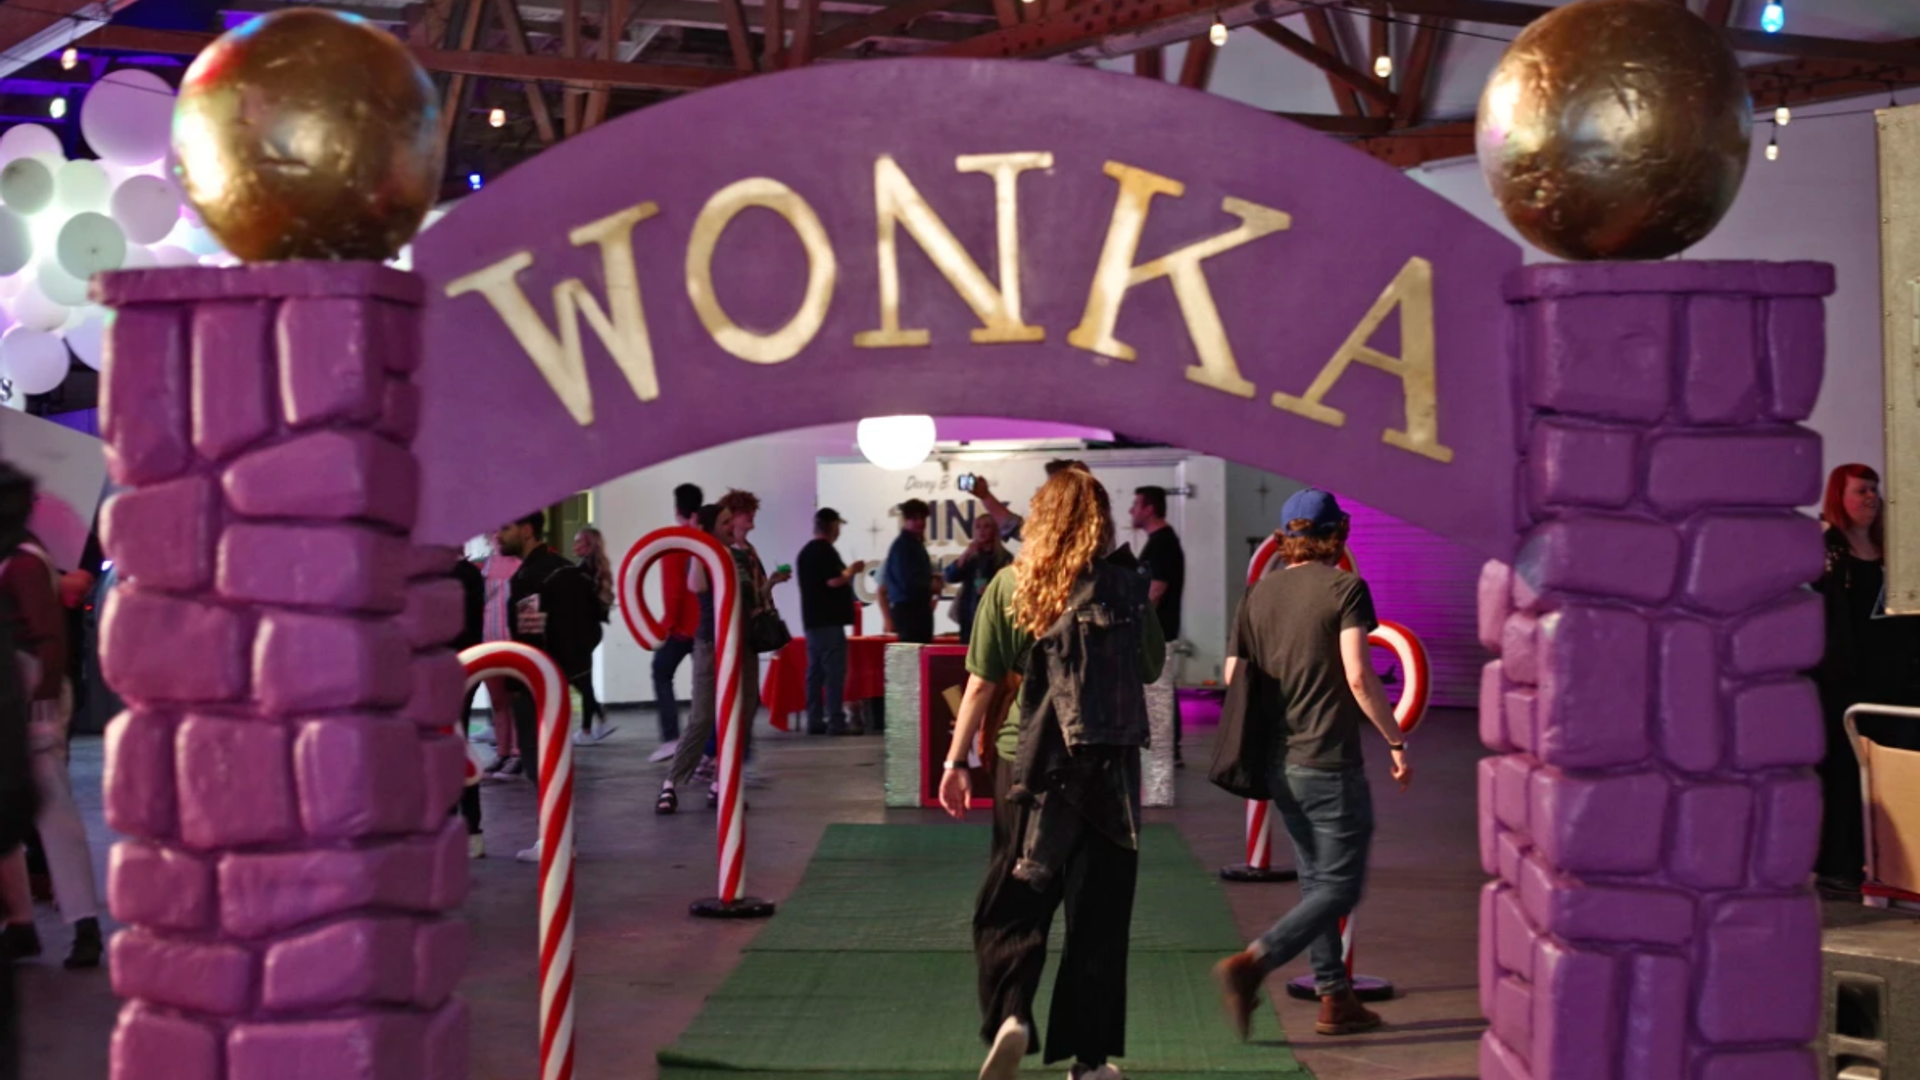 Wonka-inspired chocolate experience in LA that mimics Glasgow event attracts dozens